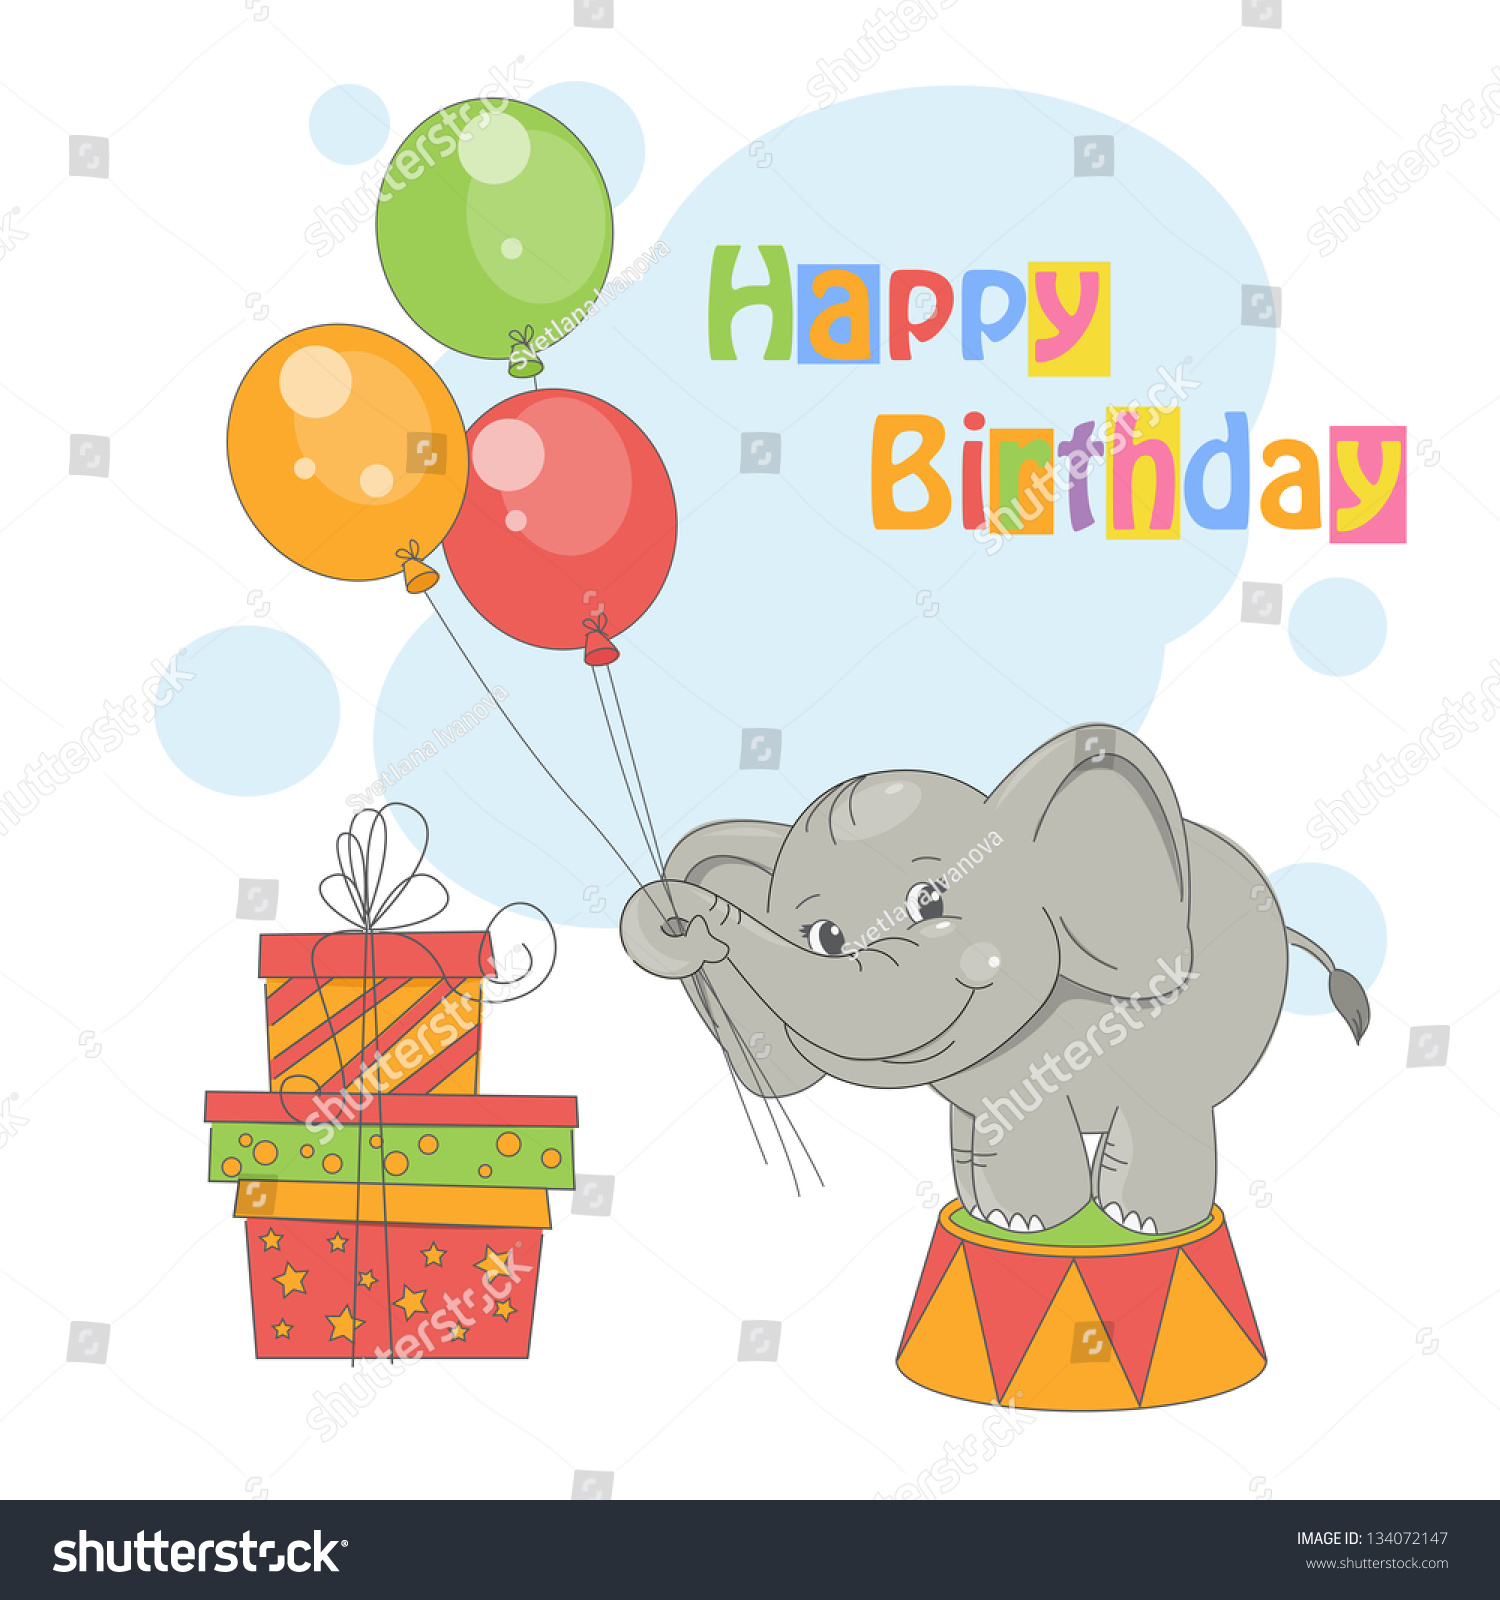 Happy Birthday. Colorful Illustration Of Cute Elephant With Balloons On ...